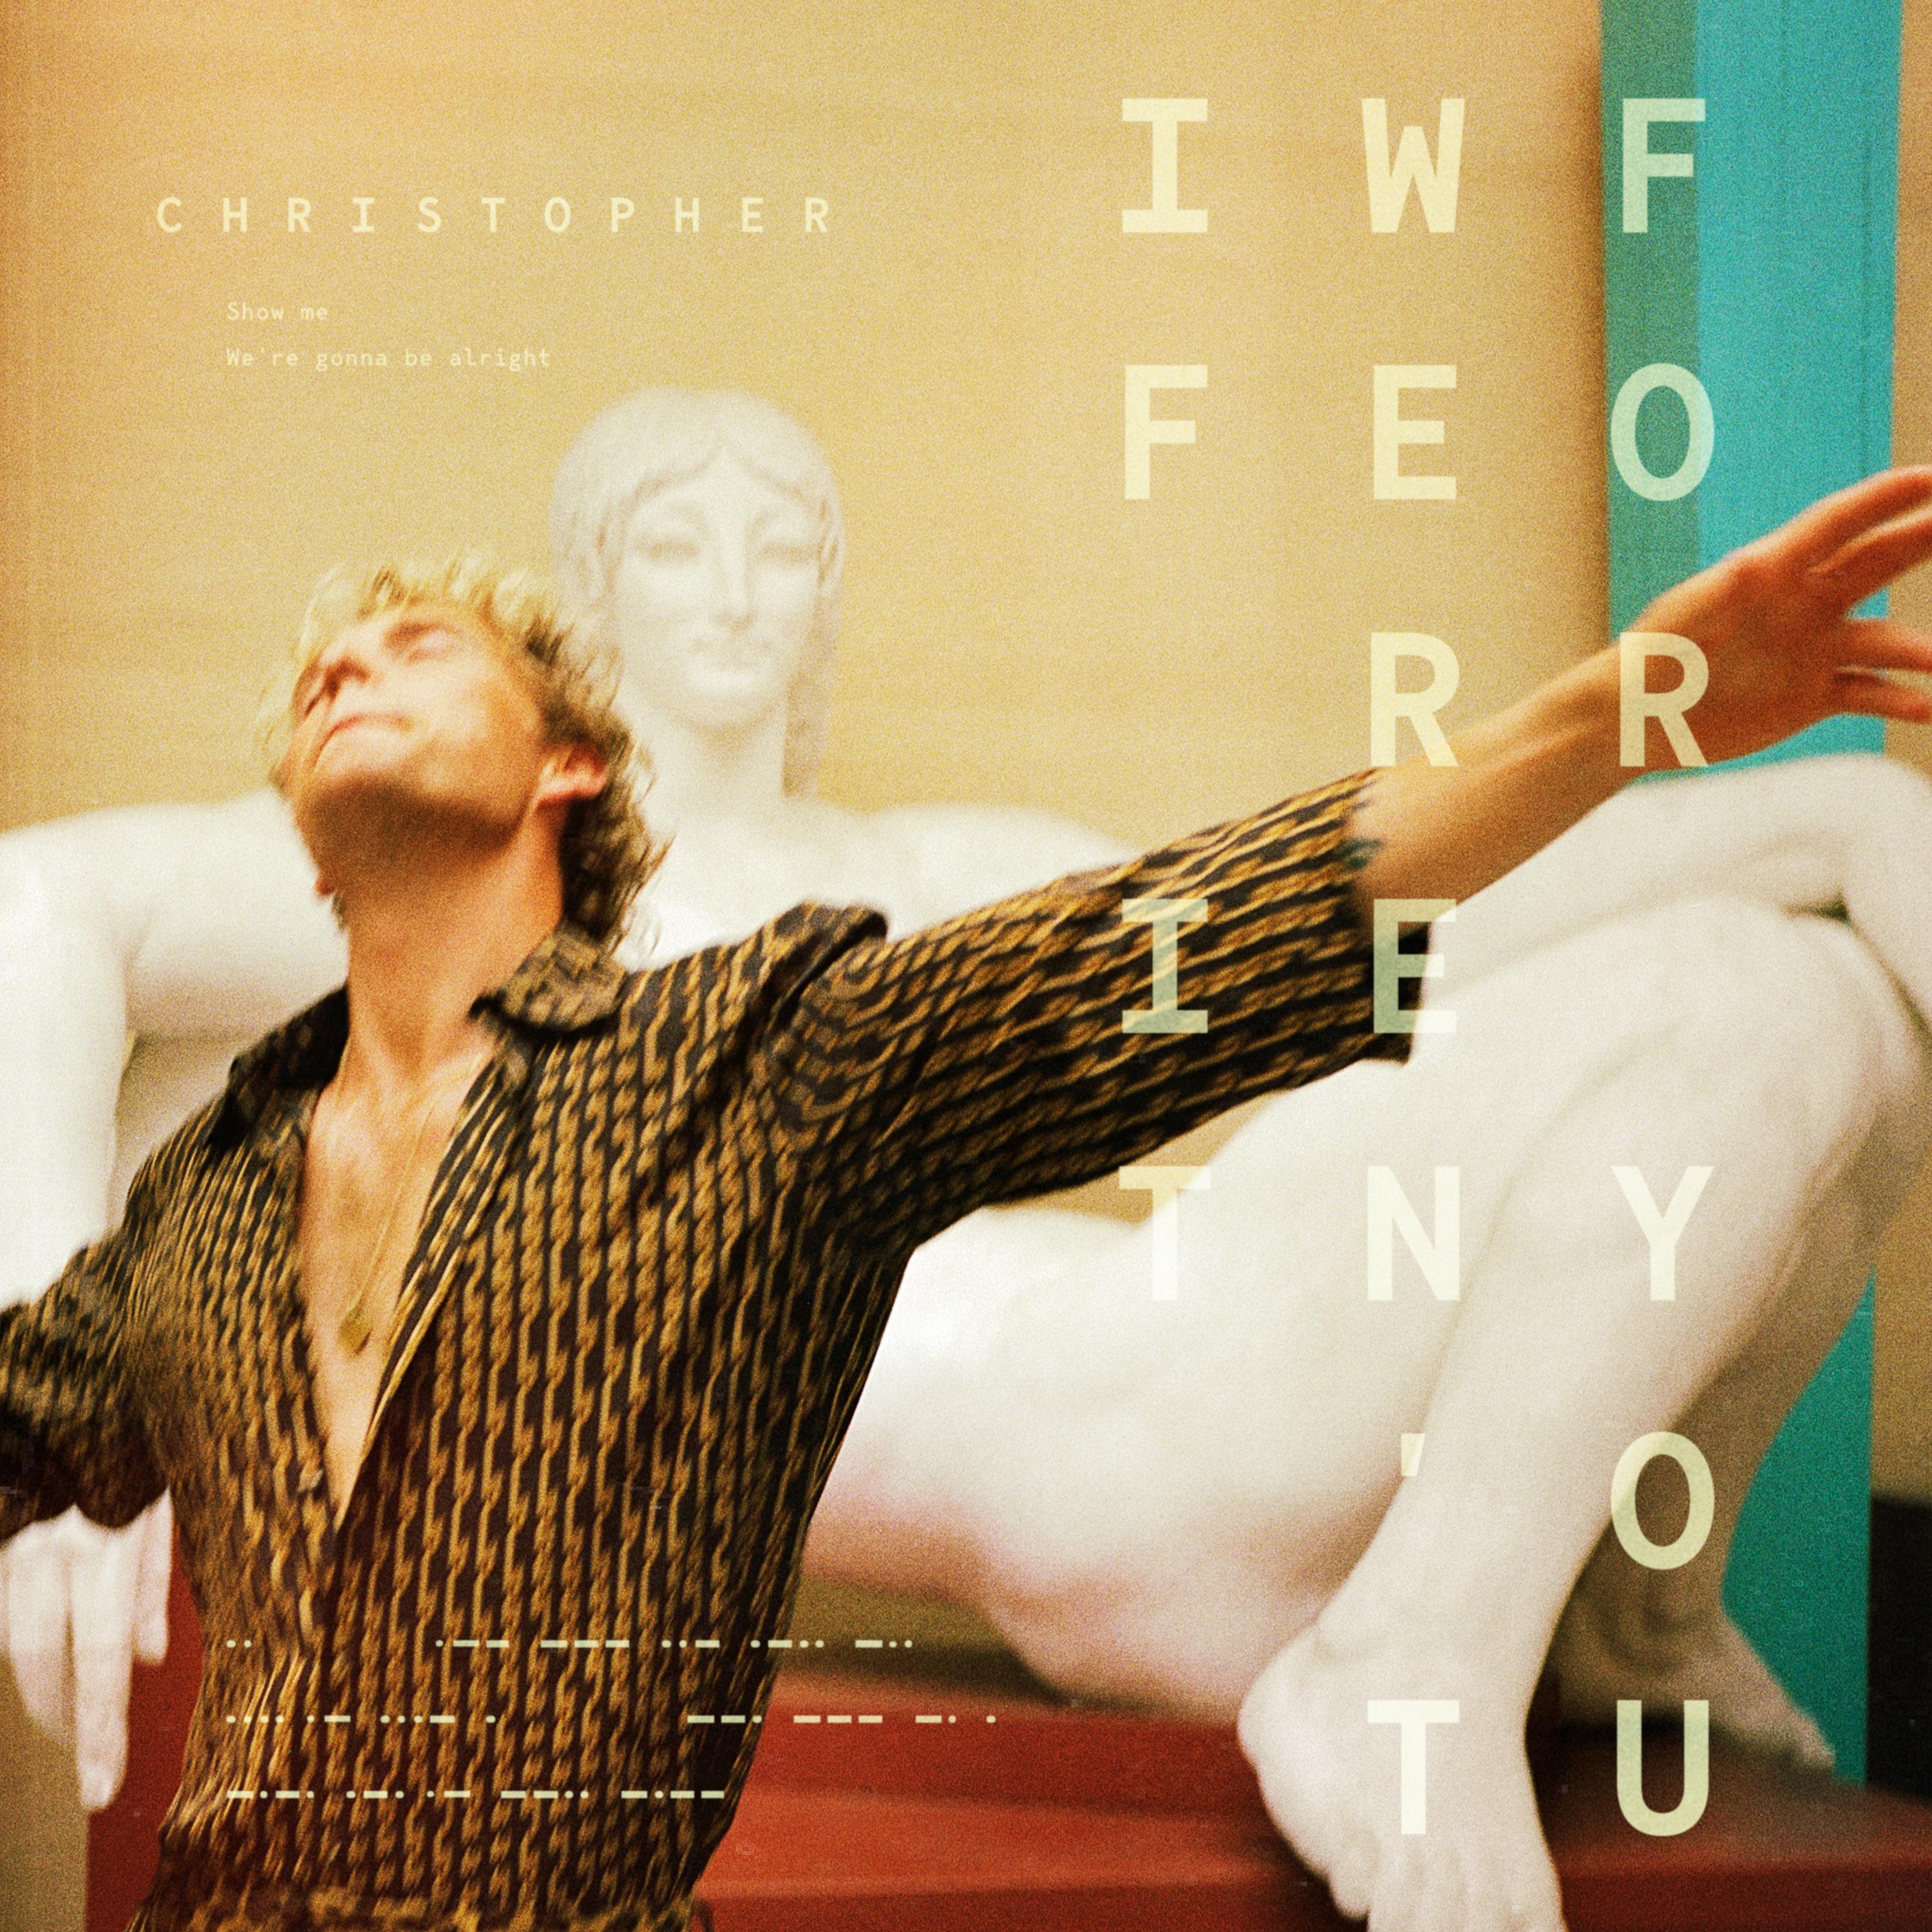 If It Weren’t For You歌词 歌手Christopher-专辑If It Weren’t For You-单曲《If It Weren’t For You》LRC歌词下载